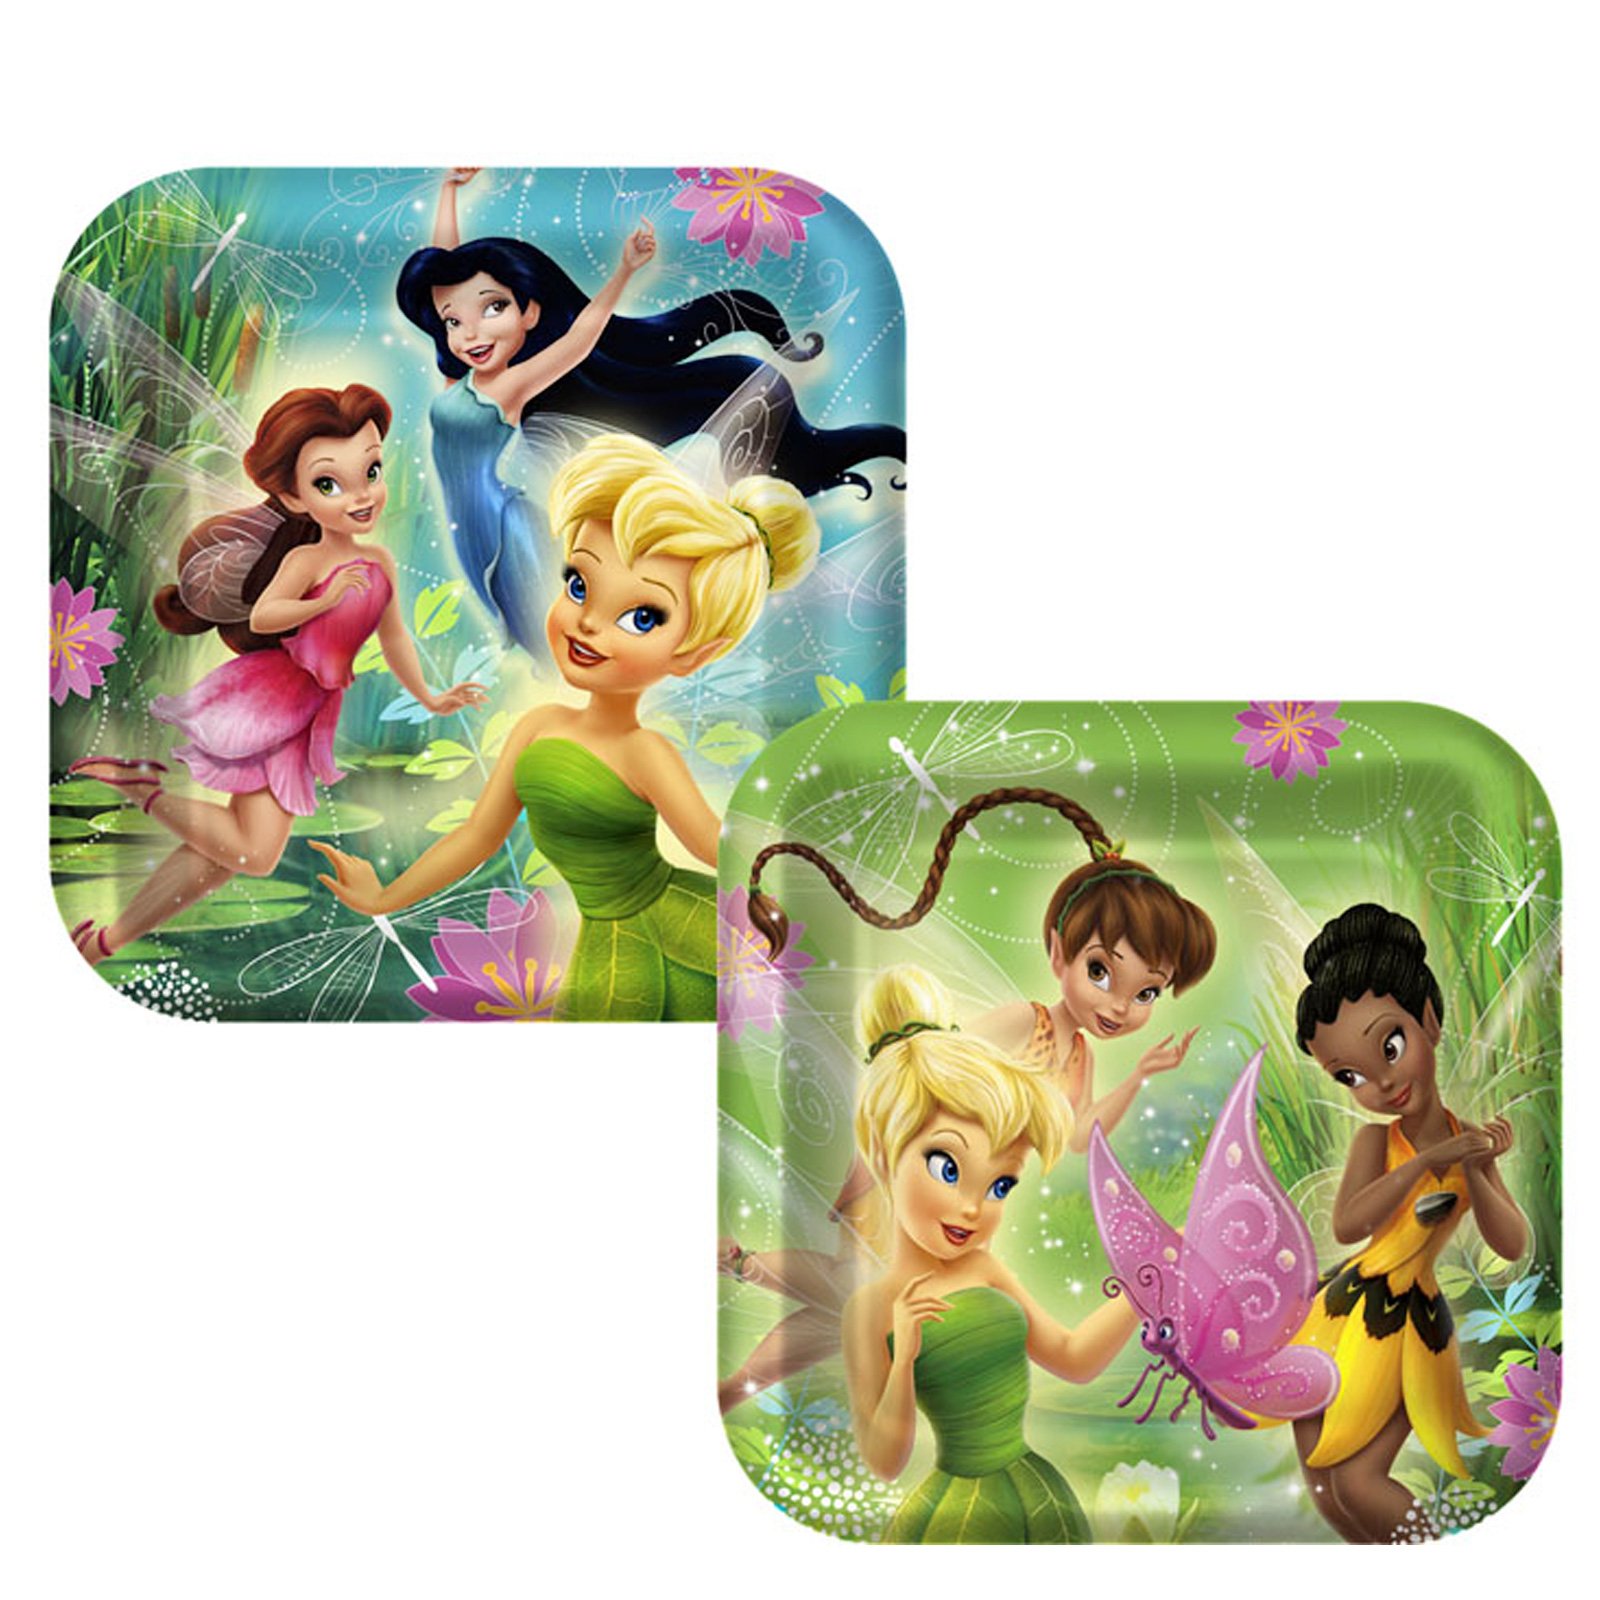 Tinker Bell and the Fairies Square Dinner Plates Assorted (8 cou